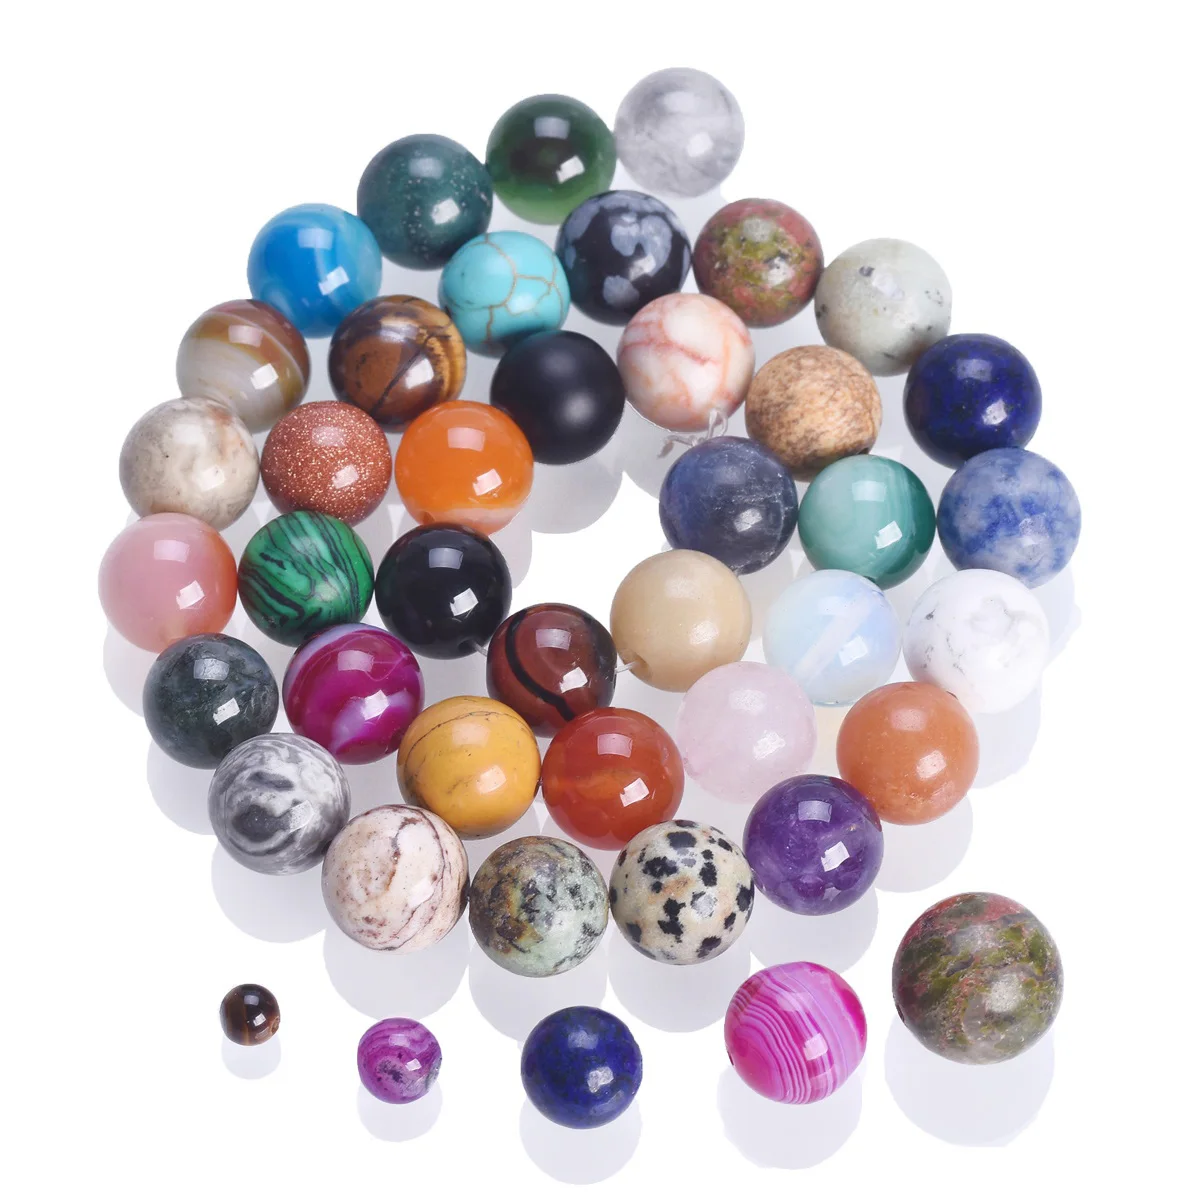 Natural Gemstone Stone Round Loose Beads lot 4mm 6mm 8mm 10mm DIY Jewelry Making 